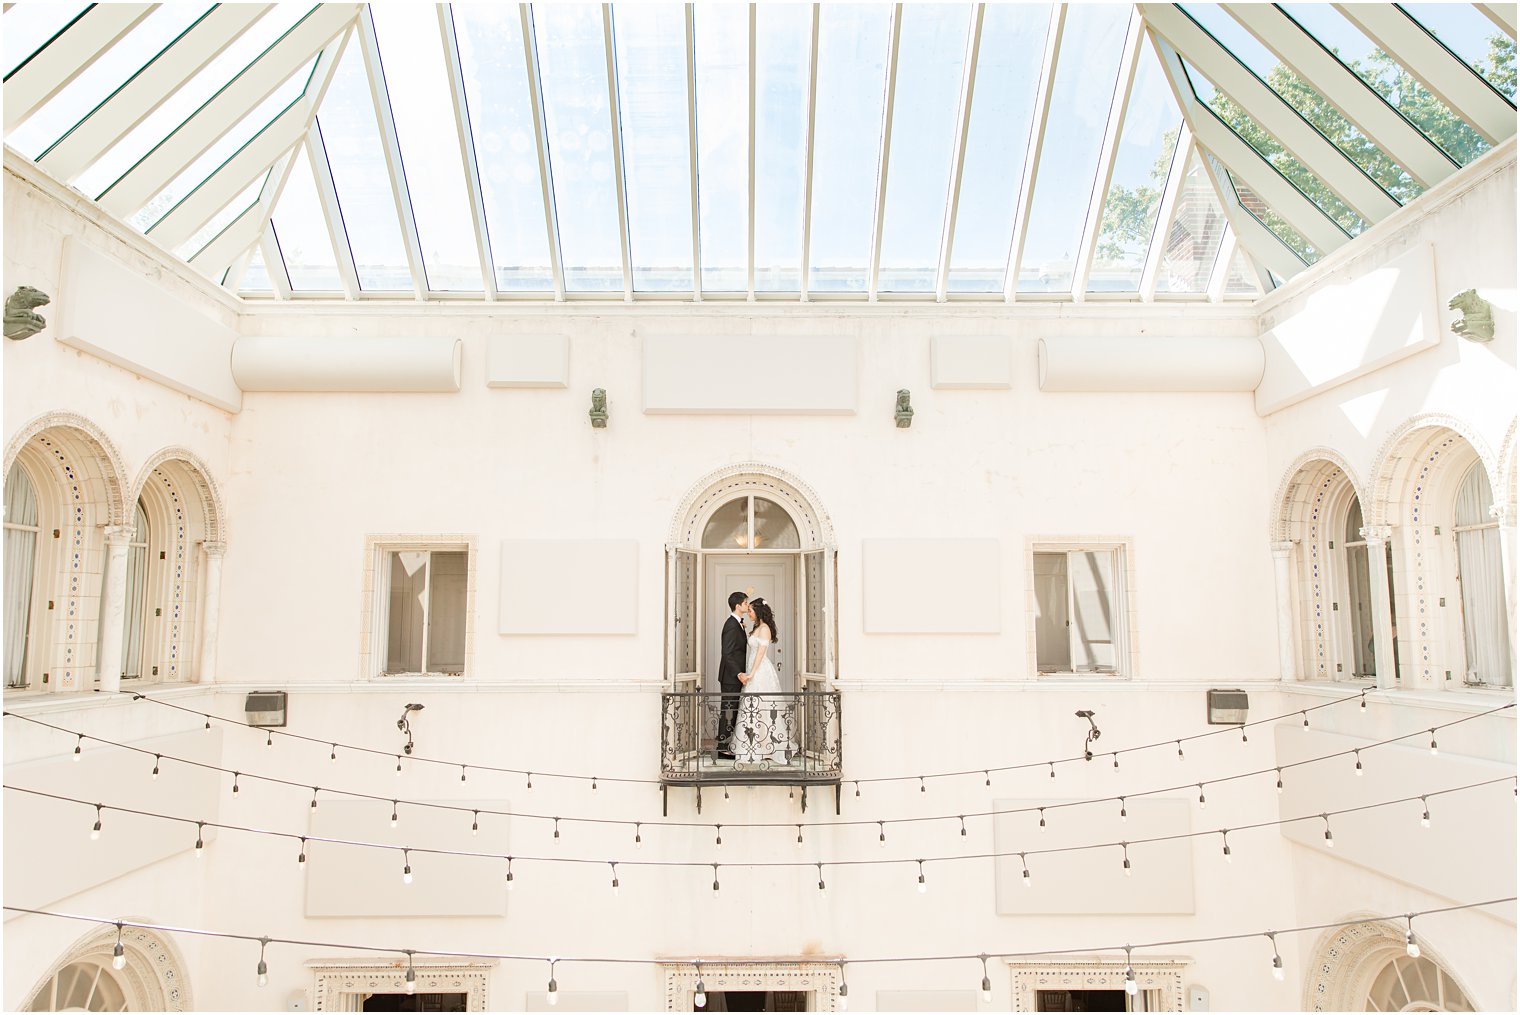 newlyweds pose on balcony over atrium at the Village Club of Sands Point